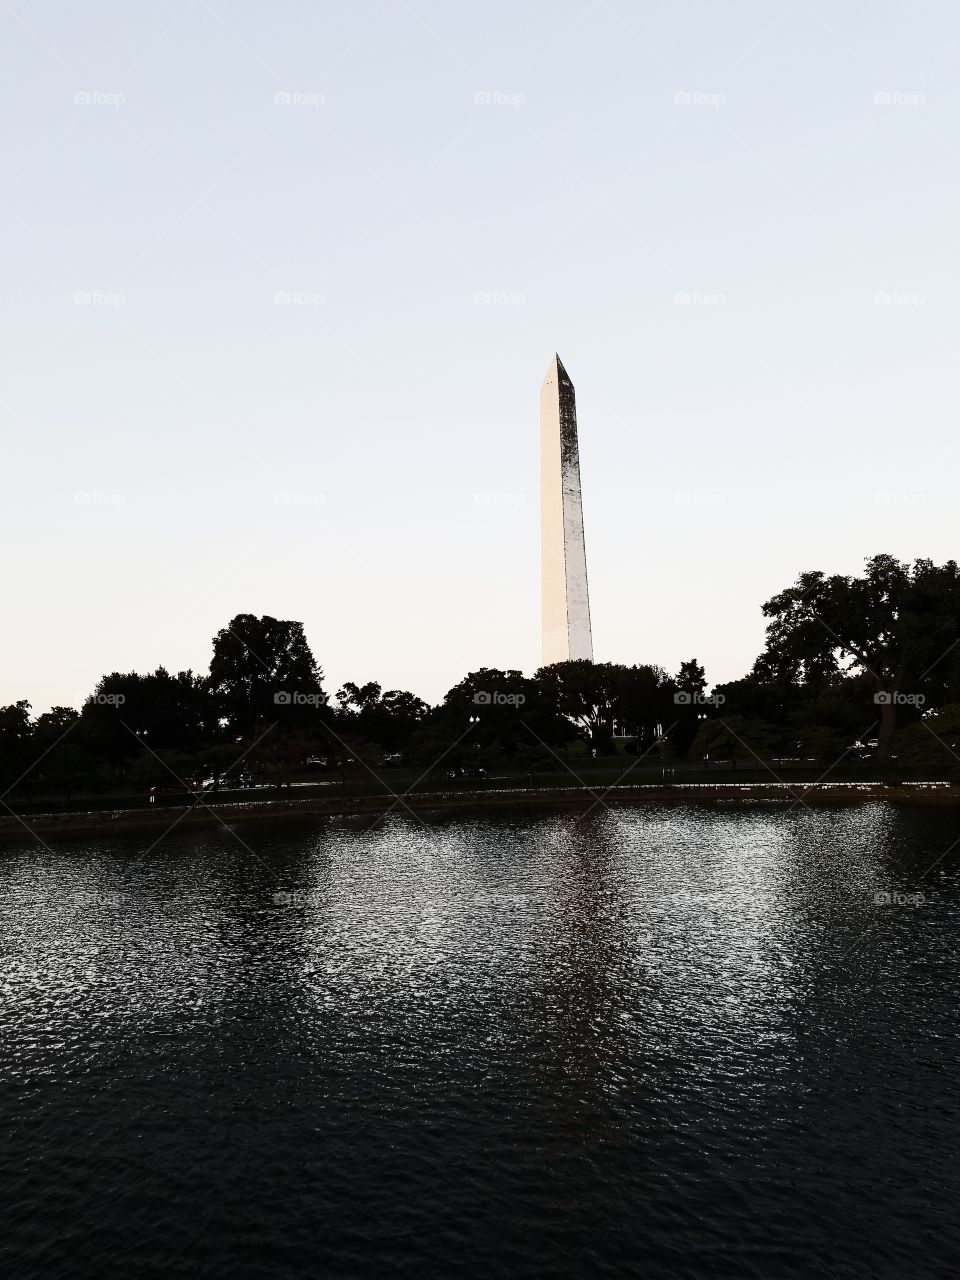 Charlie Chaplin'd the Washington monument and a lake nearby